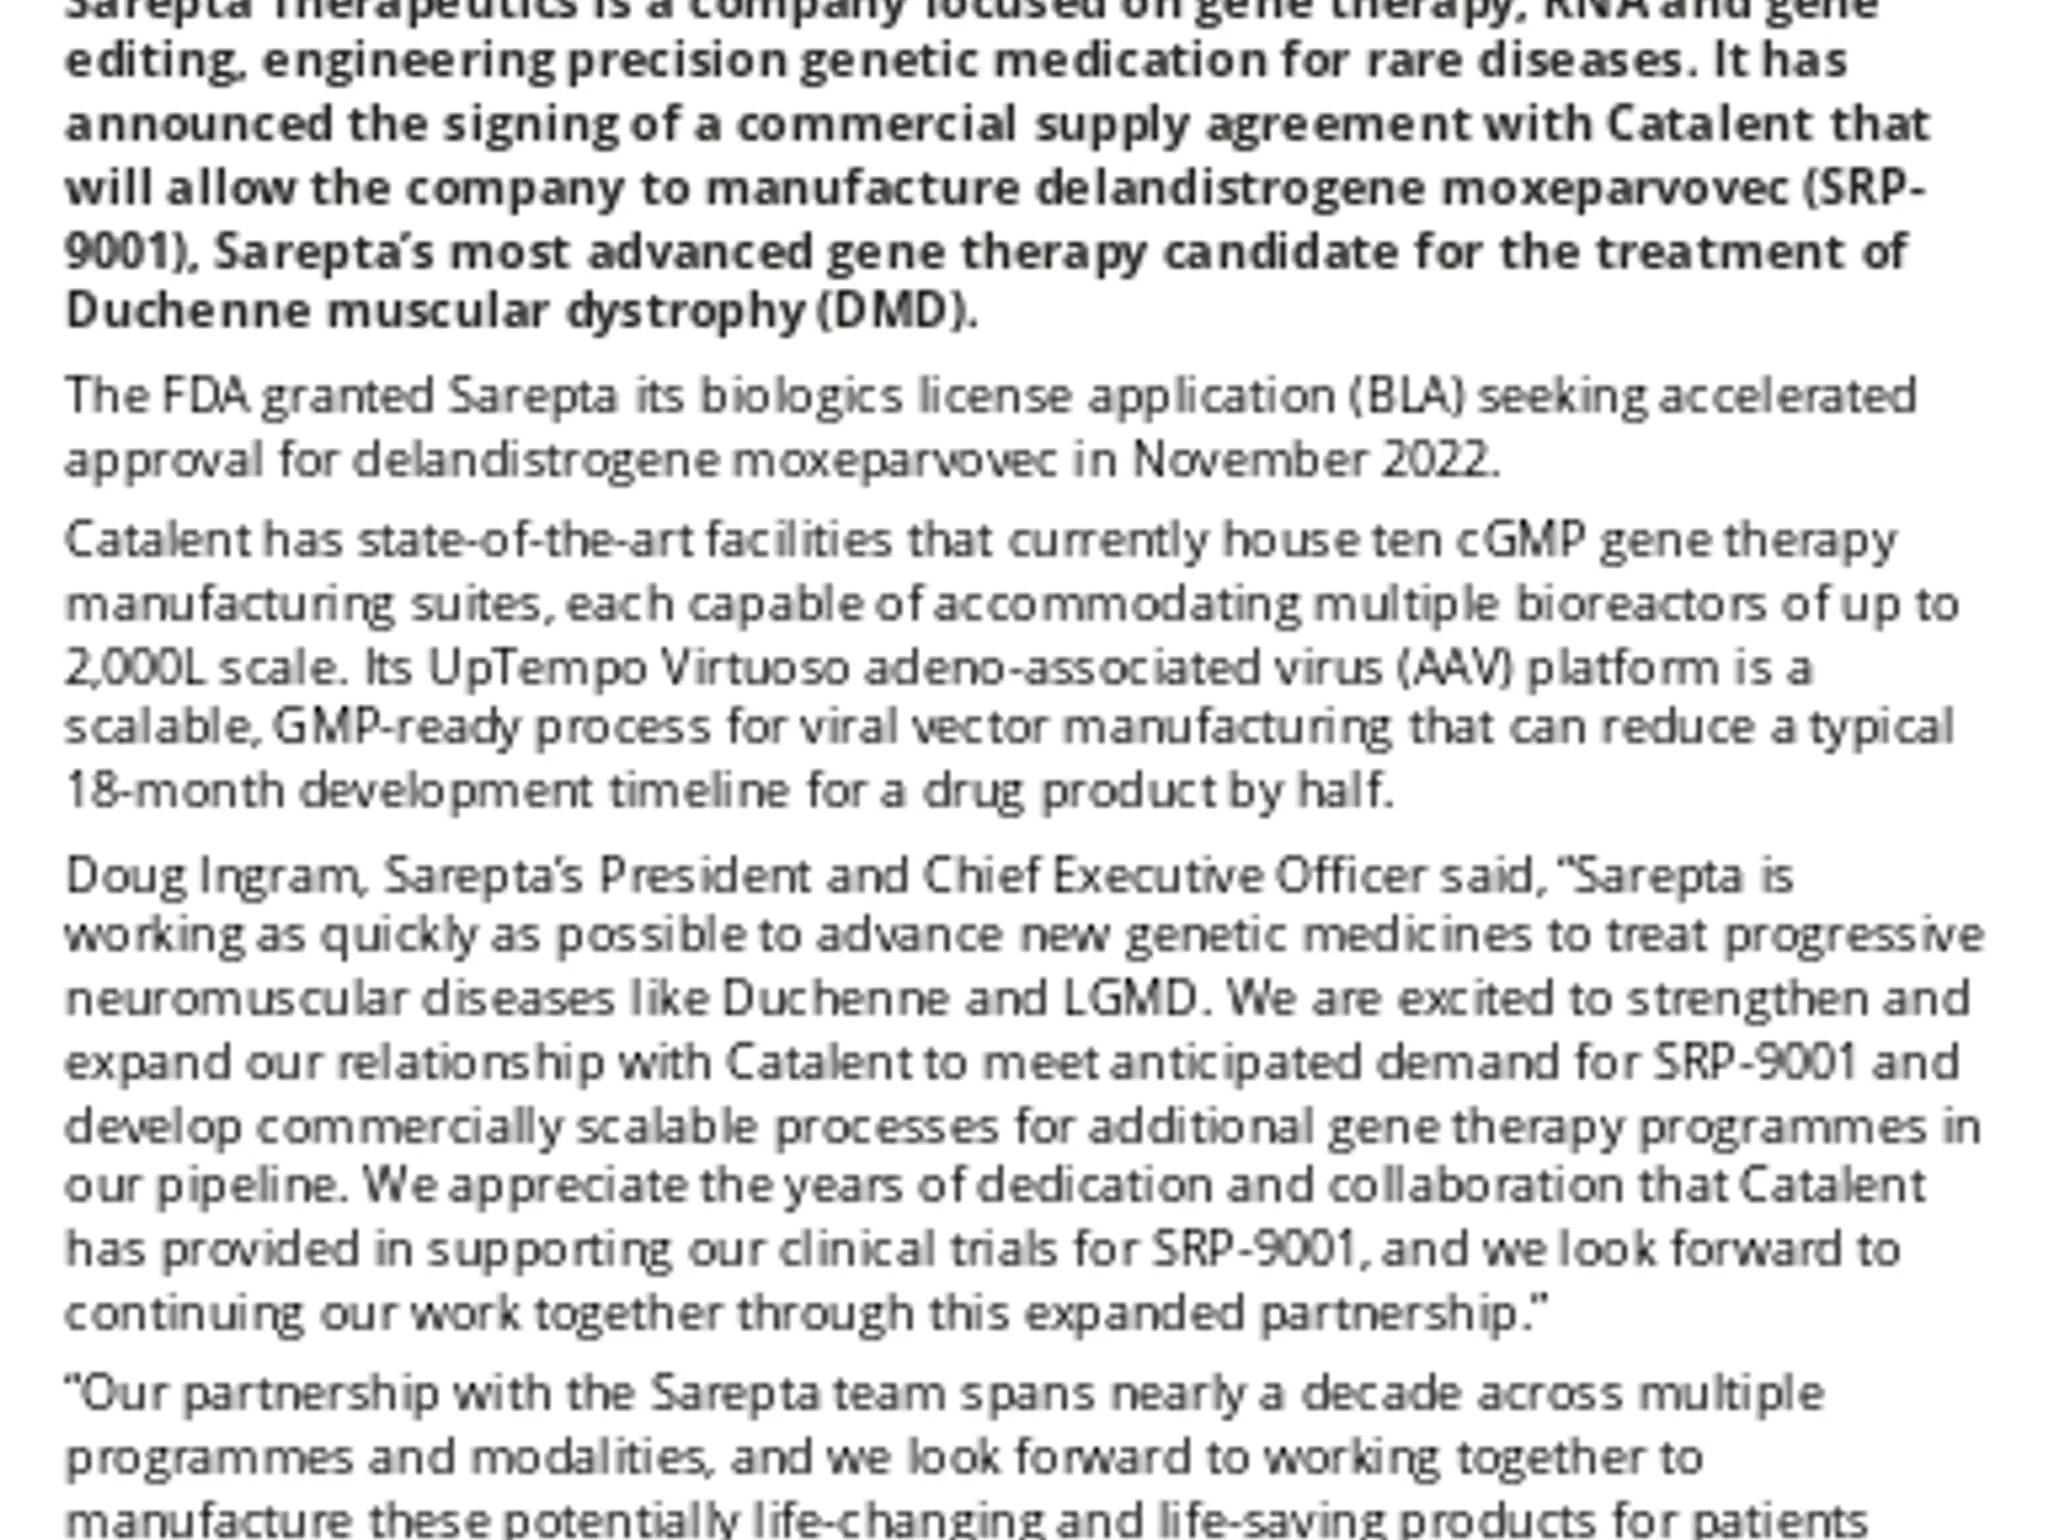 Sarepta Therapeutics And Catalent Sign Manufacturing Deal For Dmd Gene Therapy Approval